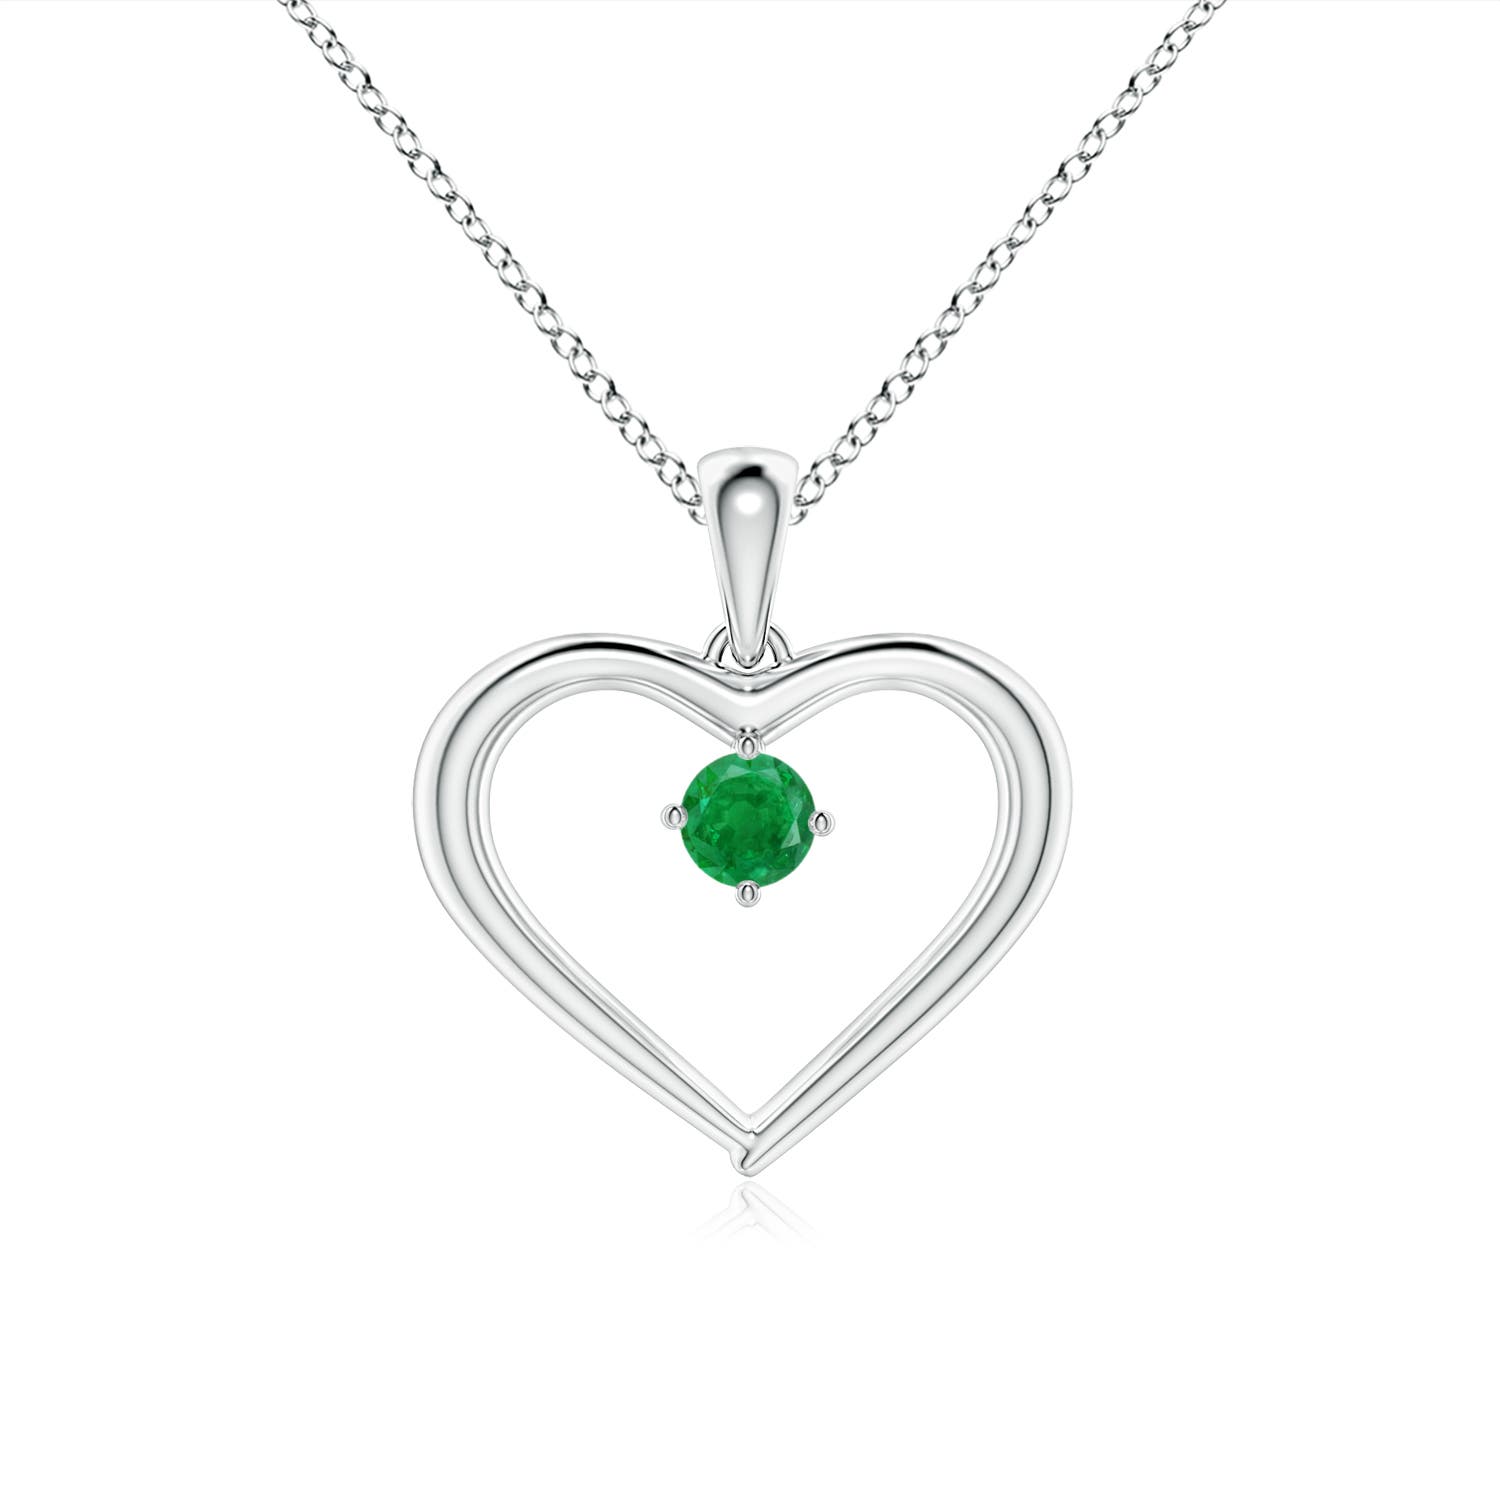 AA - Emerald / 0.1 CT / 14 KT White Gold